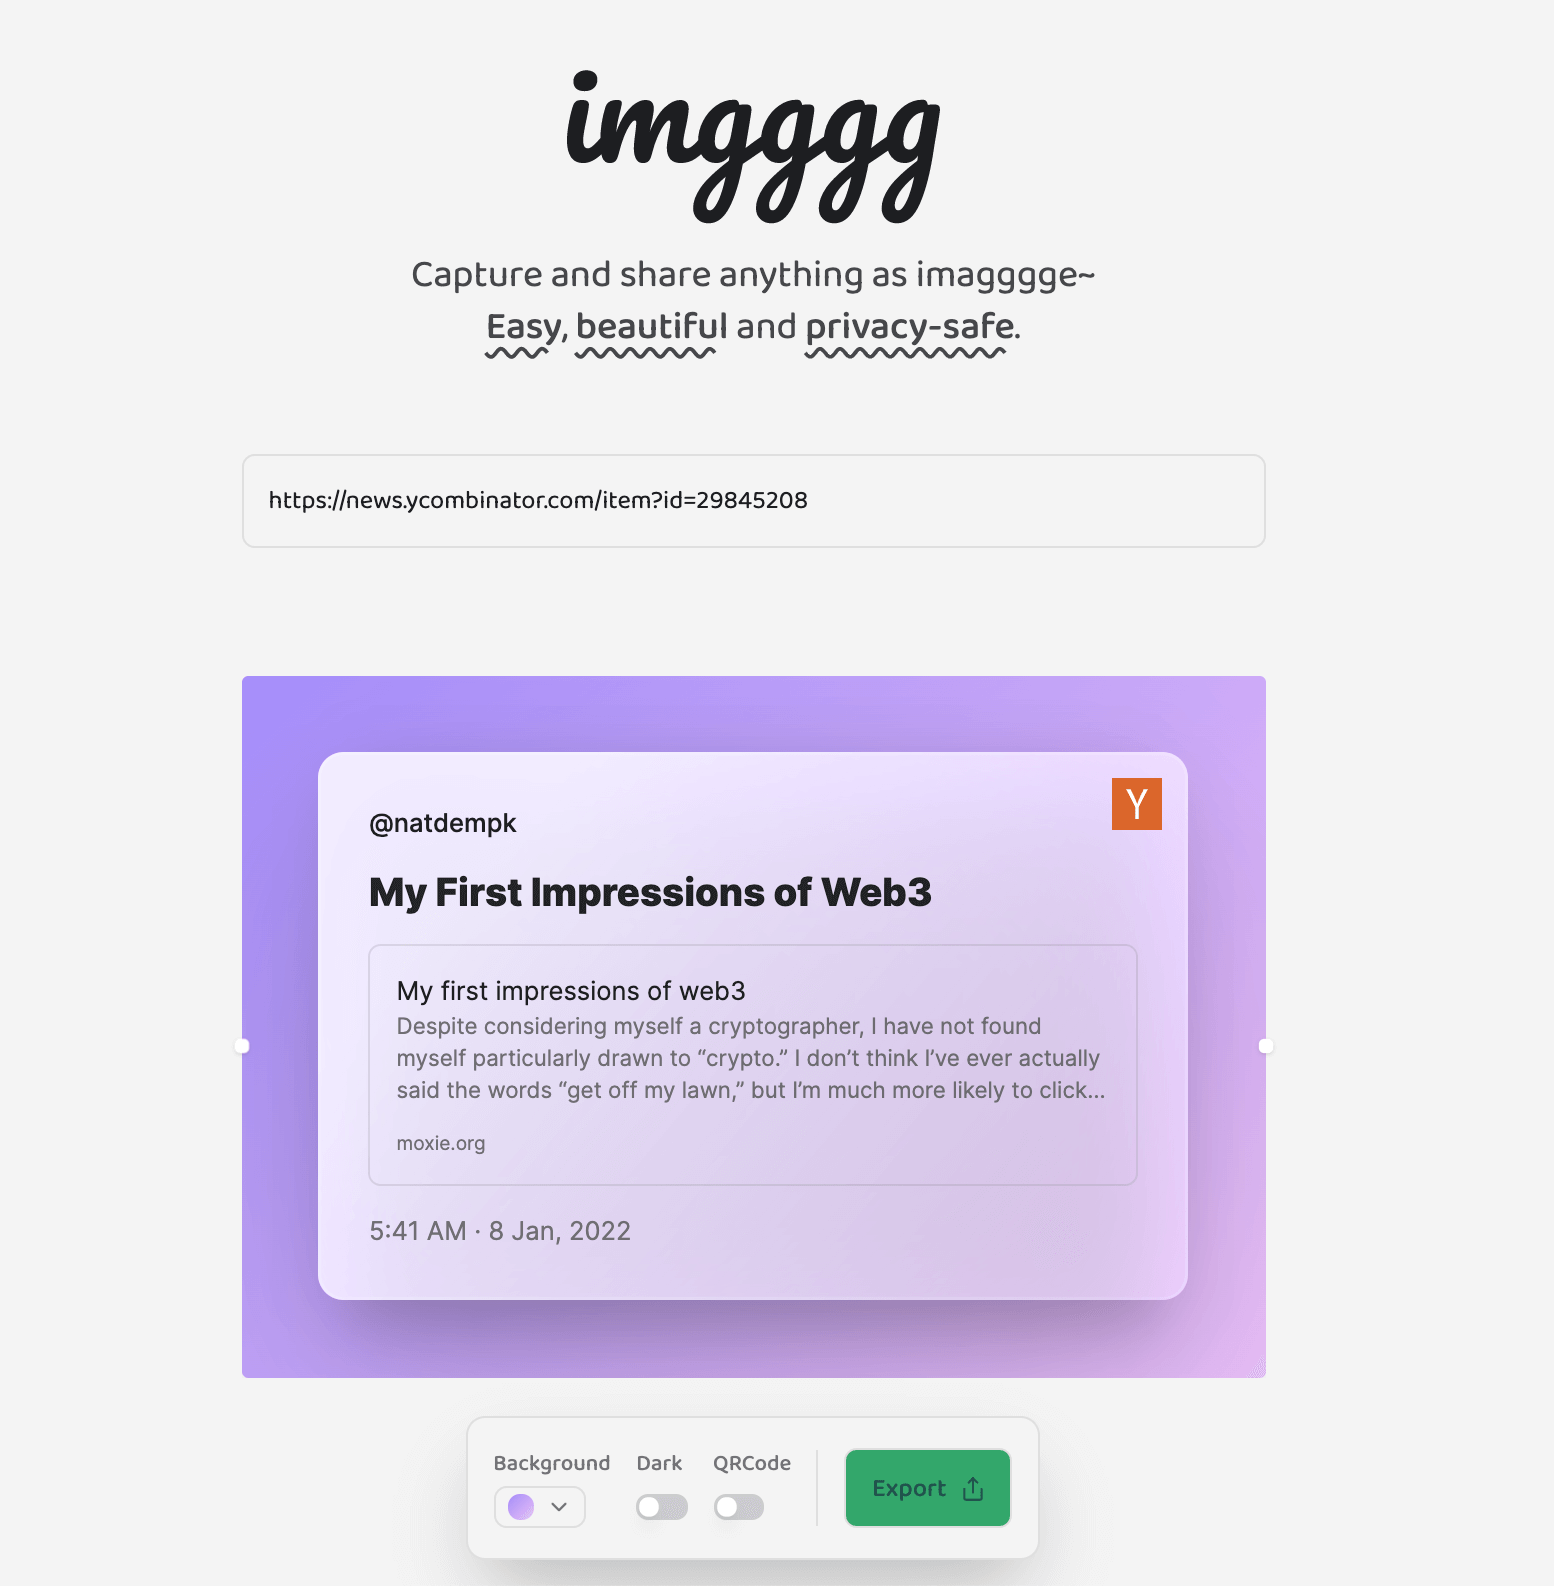 imgggg | Capture and share anything as image